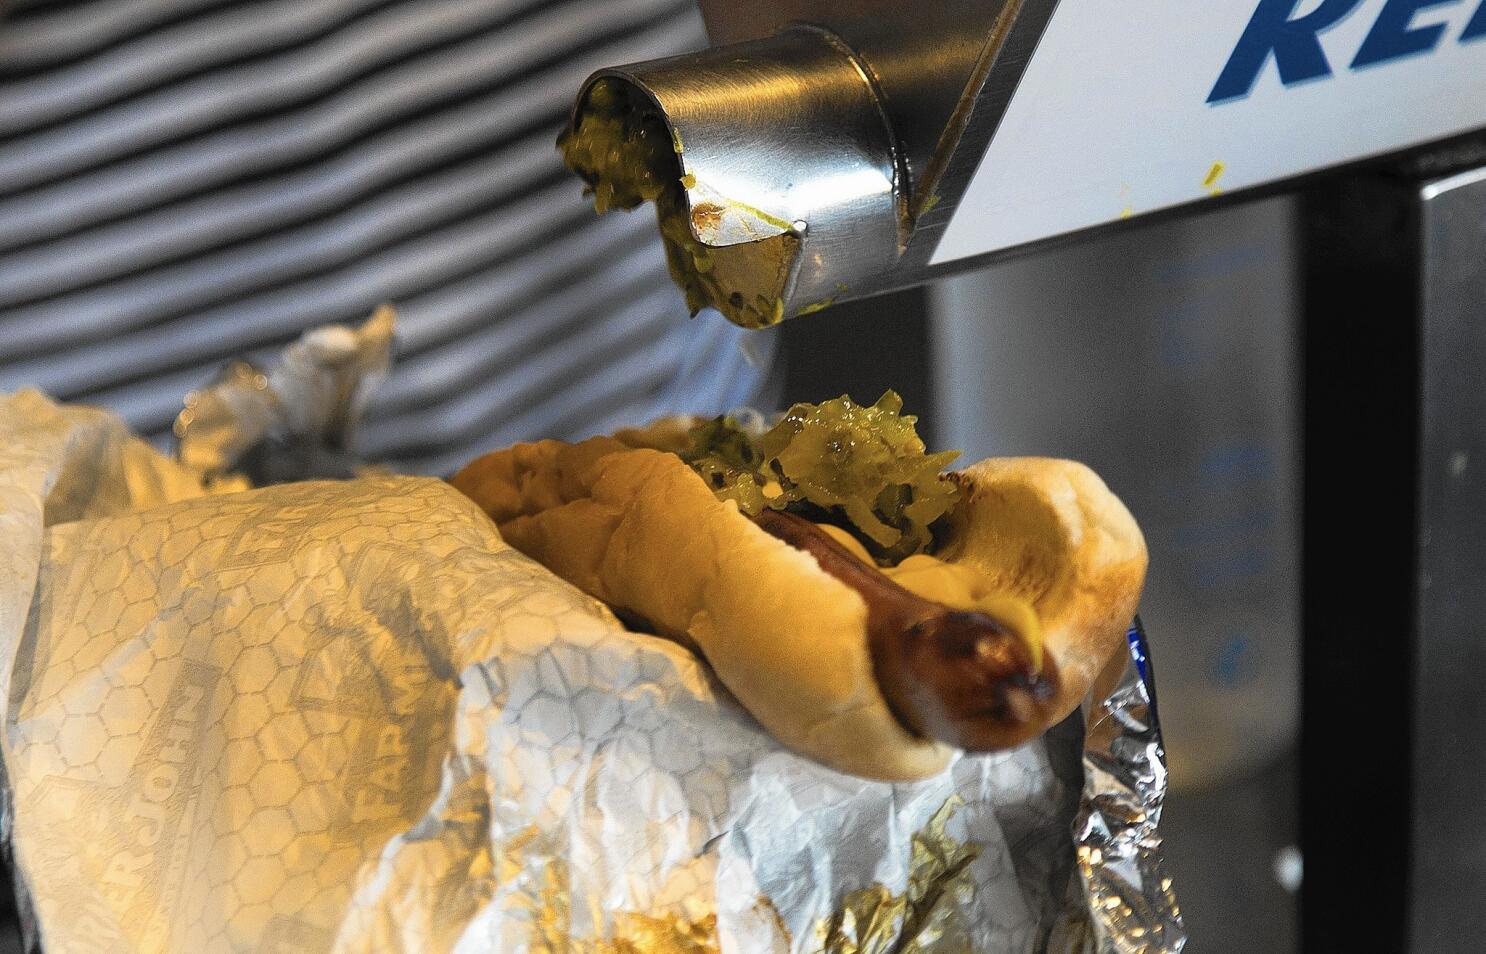 A Frank History Of The Dodger Dog: A Ballpark Classic By LA, For LA